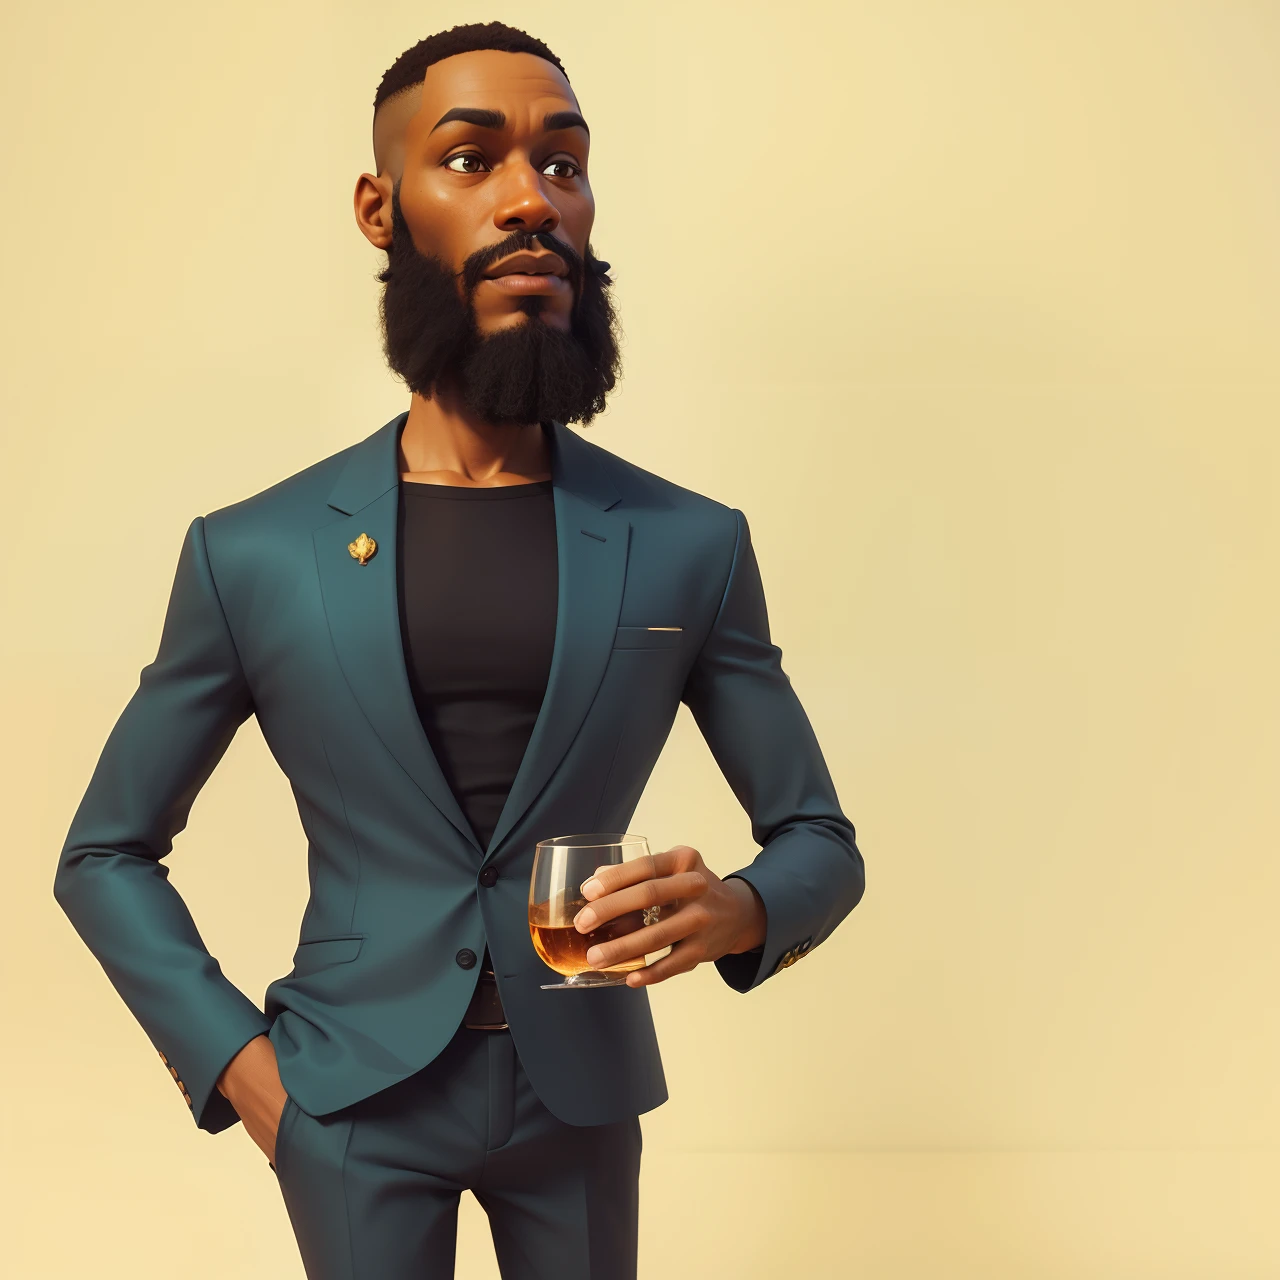 Niji style, African man in suit, holding a glass cup, hand in pocket, stylized character, 3d stylized